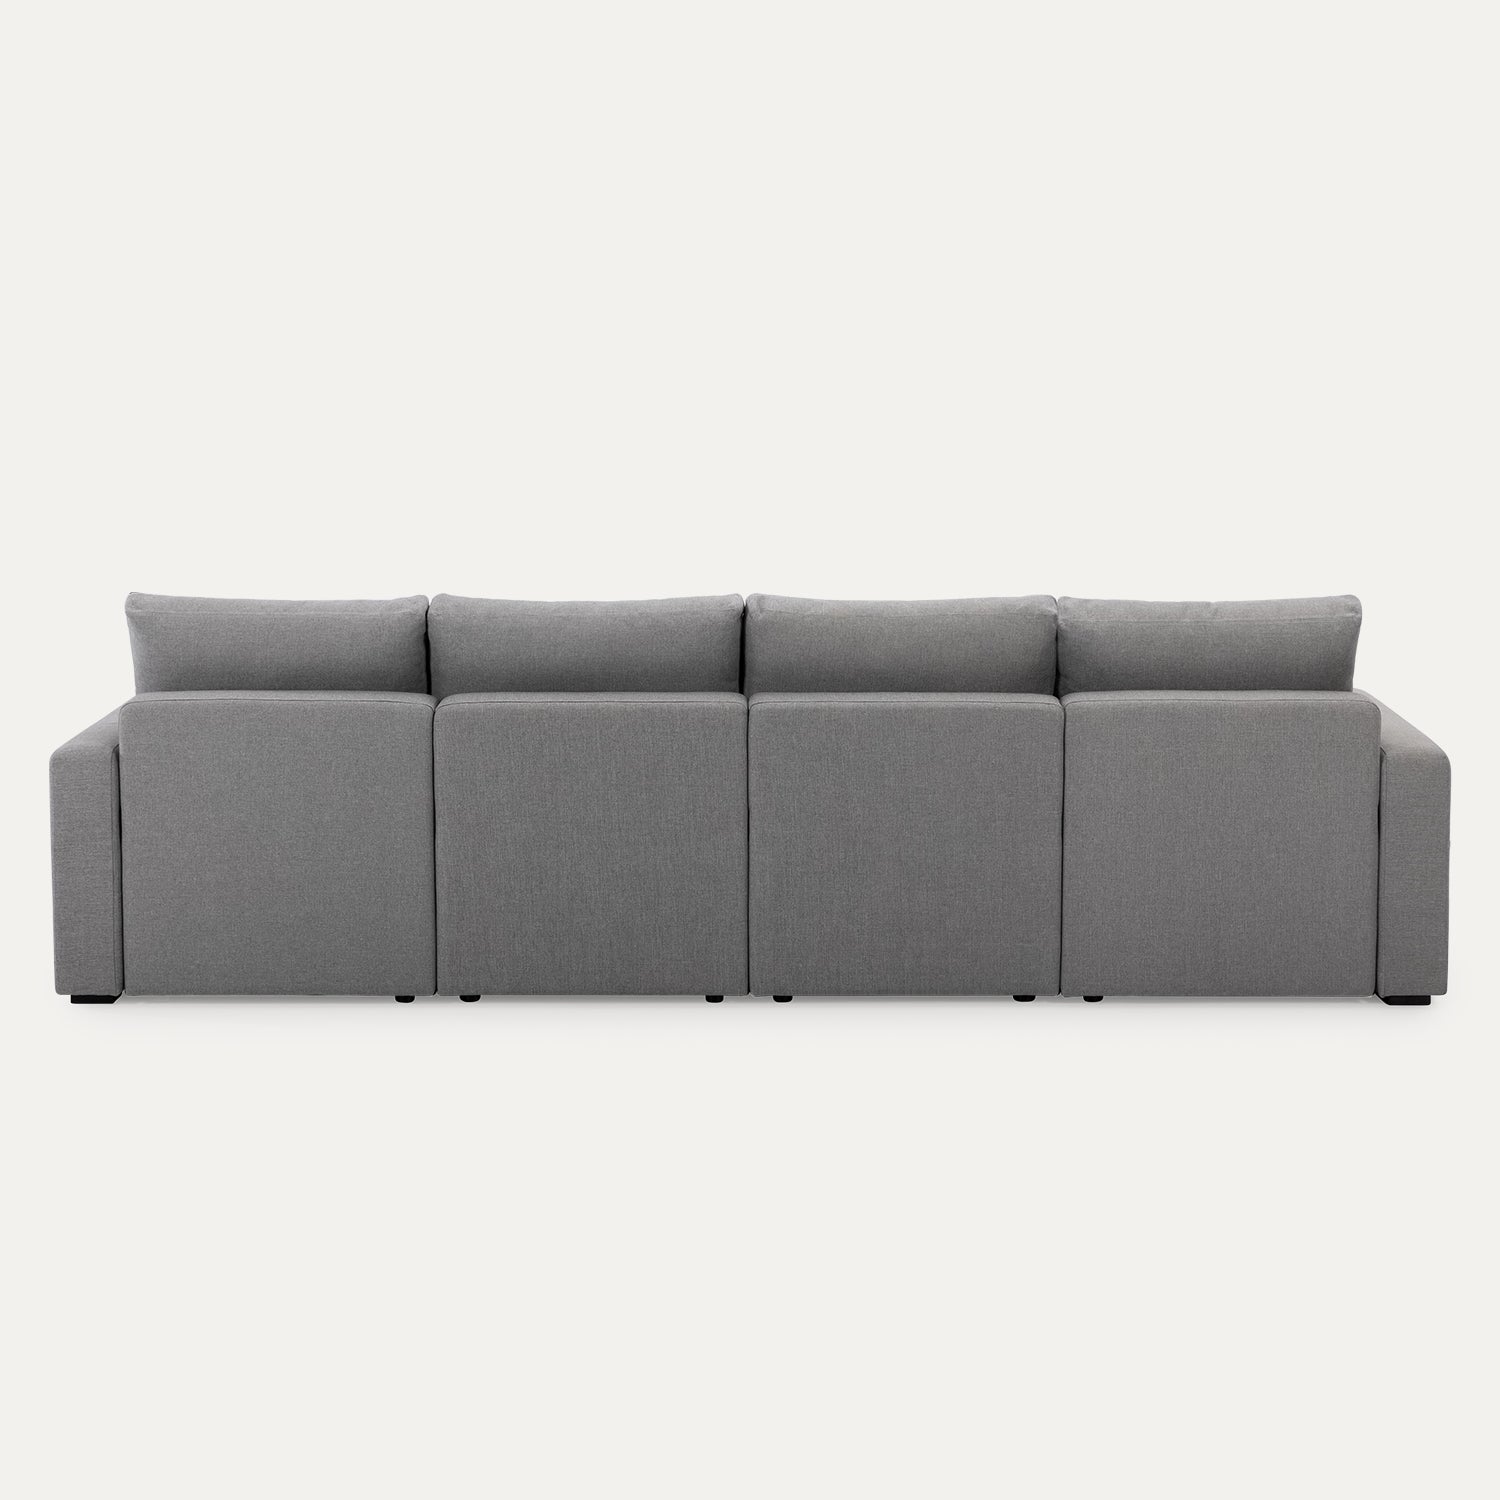 Jamison Double Chaise Sectional Sofa